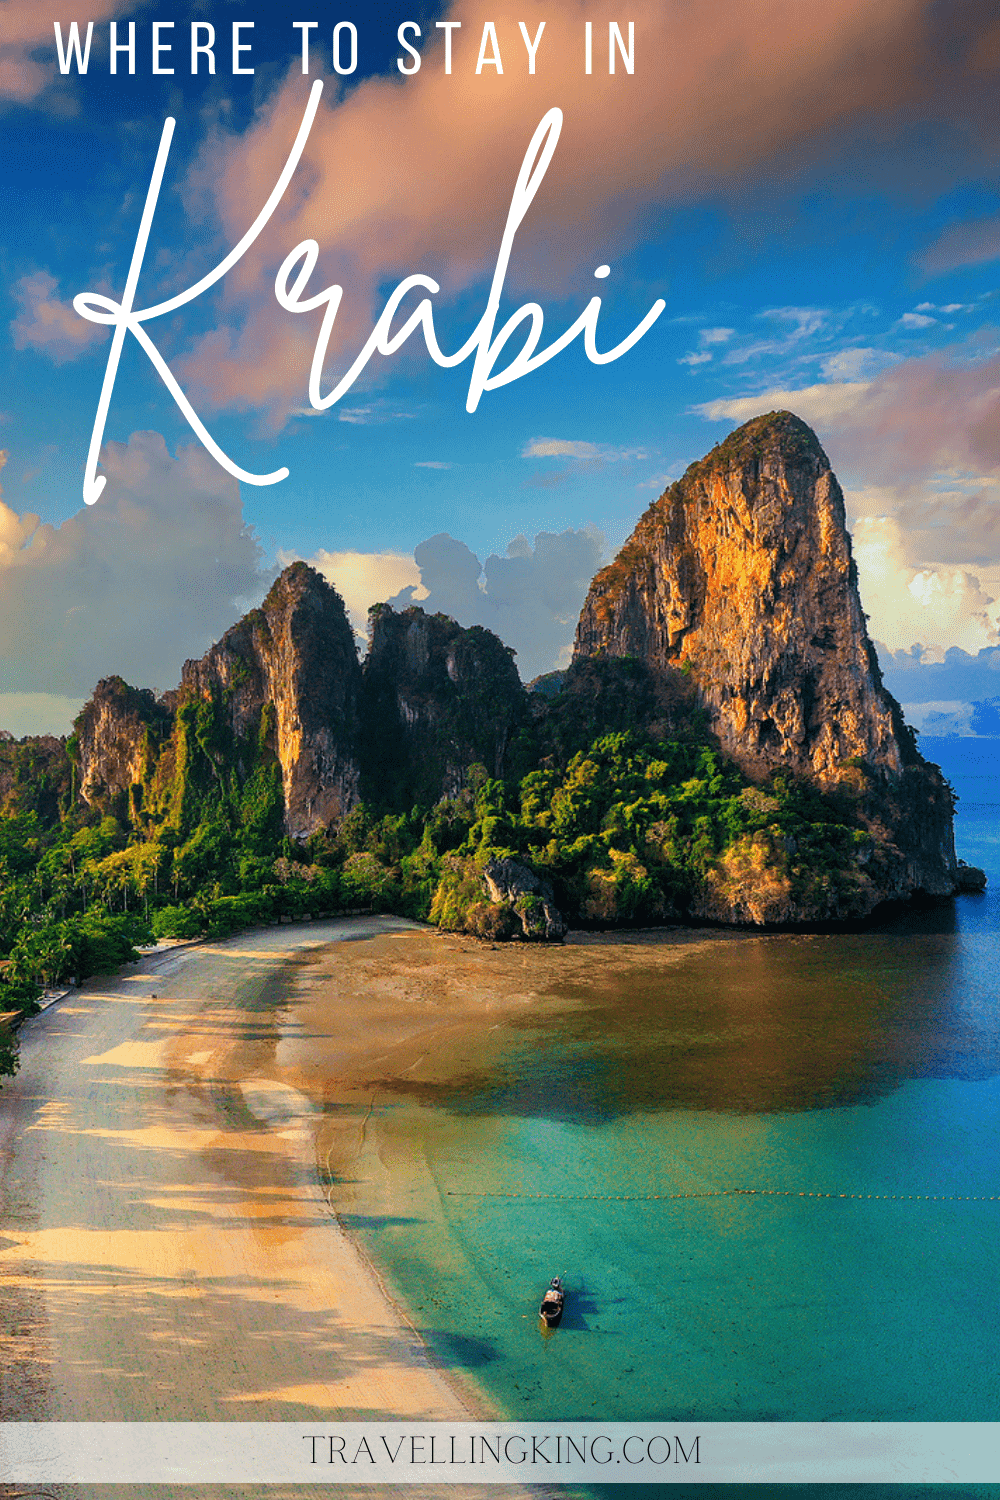 Where to stay in Krabi